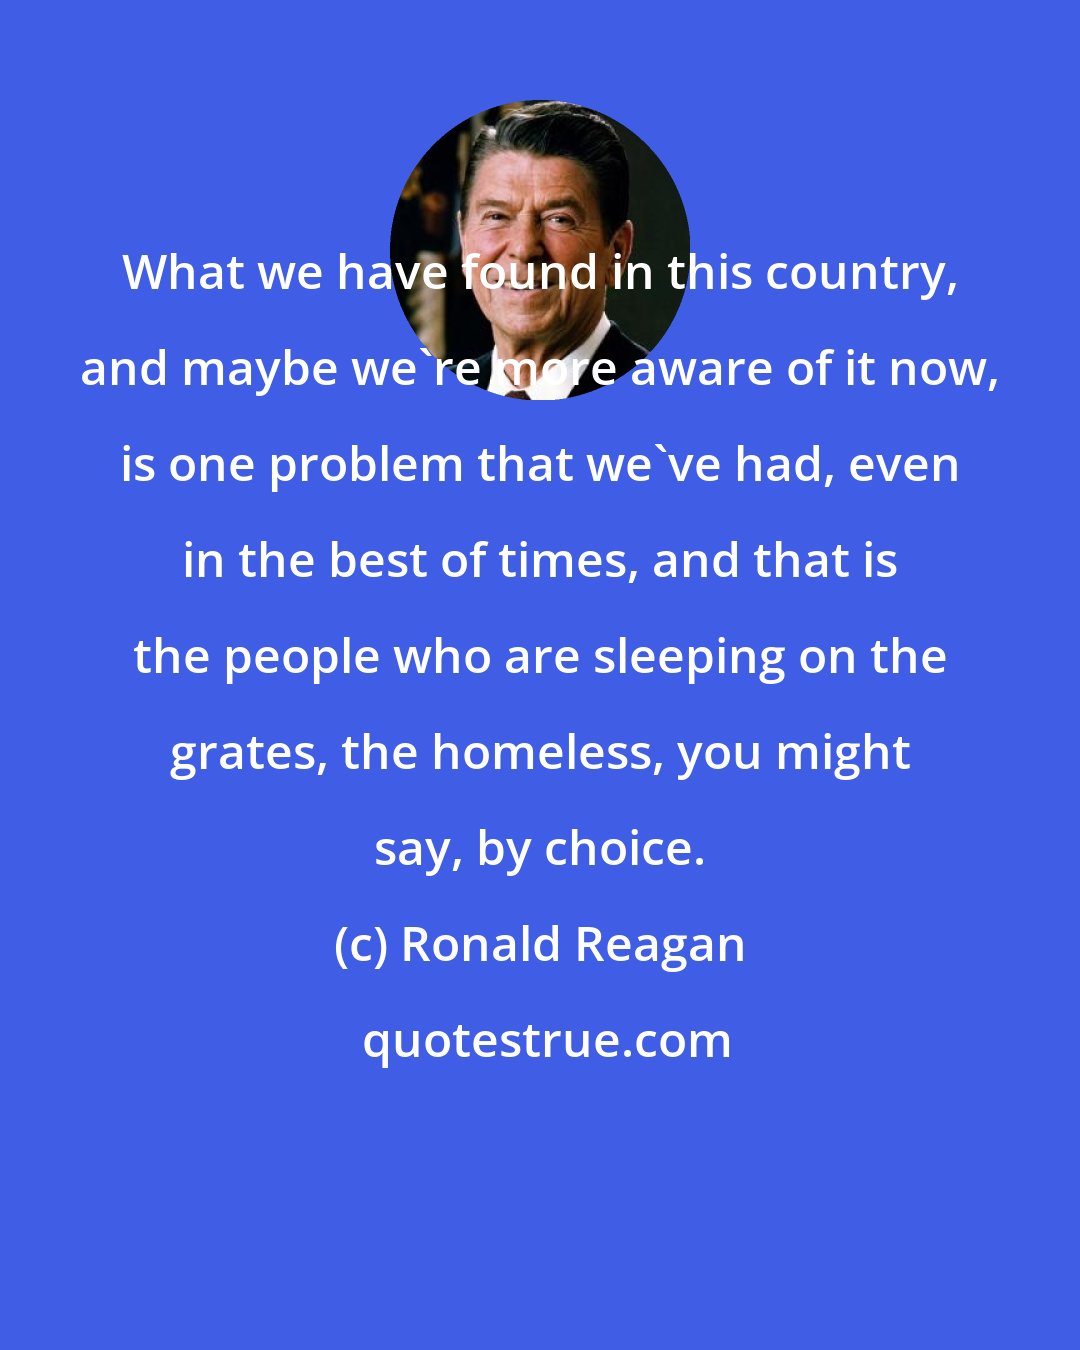 Ronald Reagan: What we have found in this country, and maybe we're more aware of it now, is one problem that we've had, even in the best of times, and that is the people who are sleeping on the grates, the homeless, you might say, by choice.